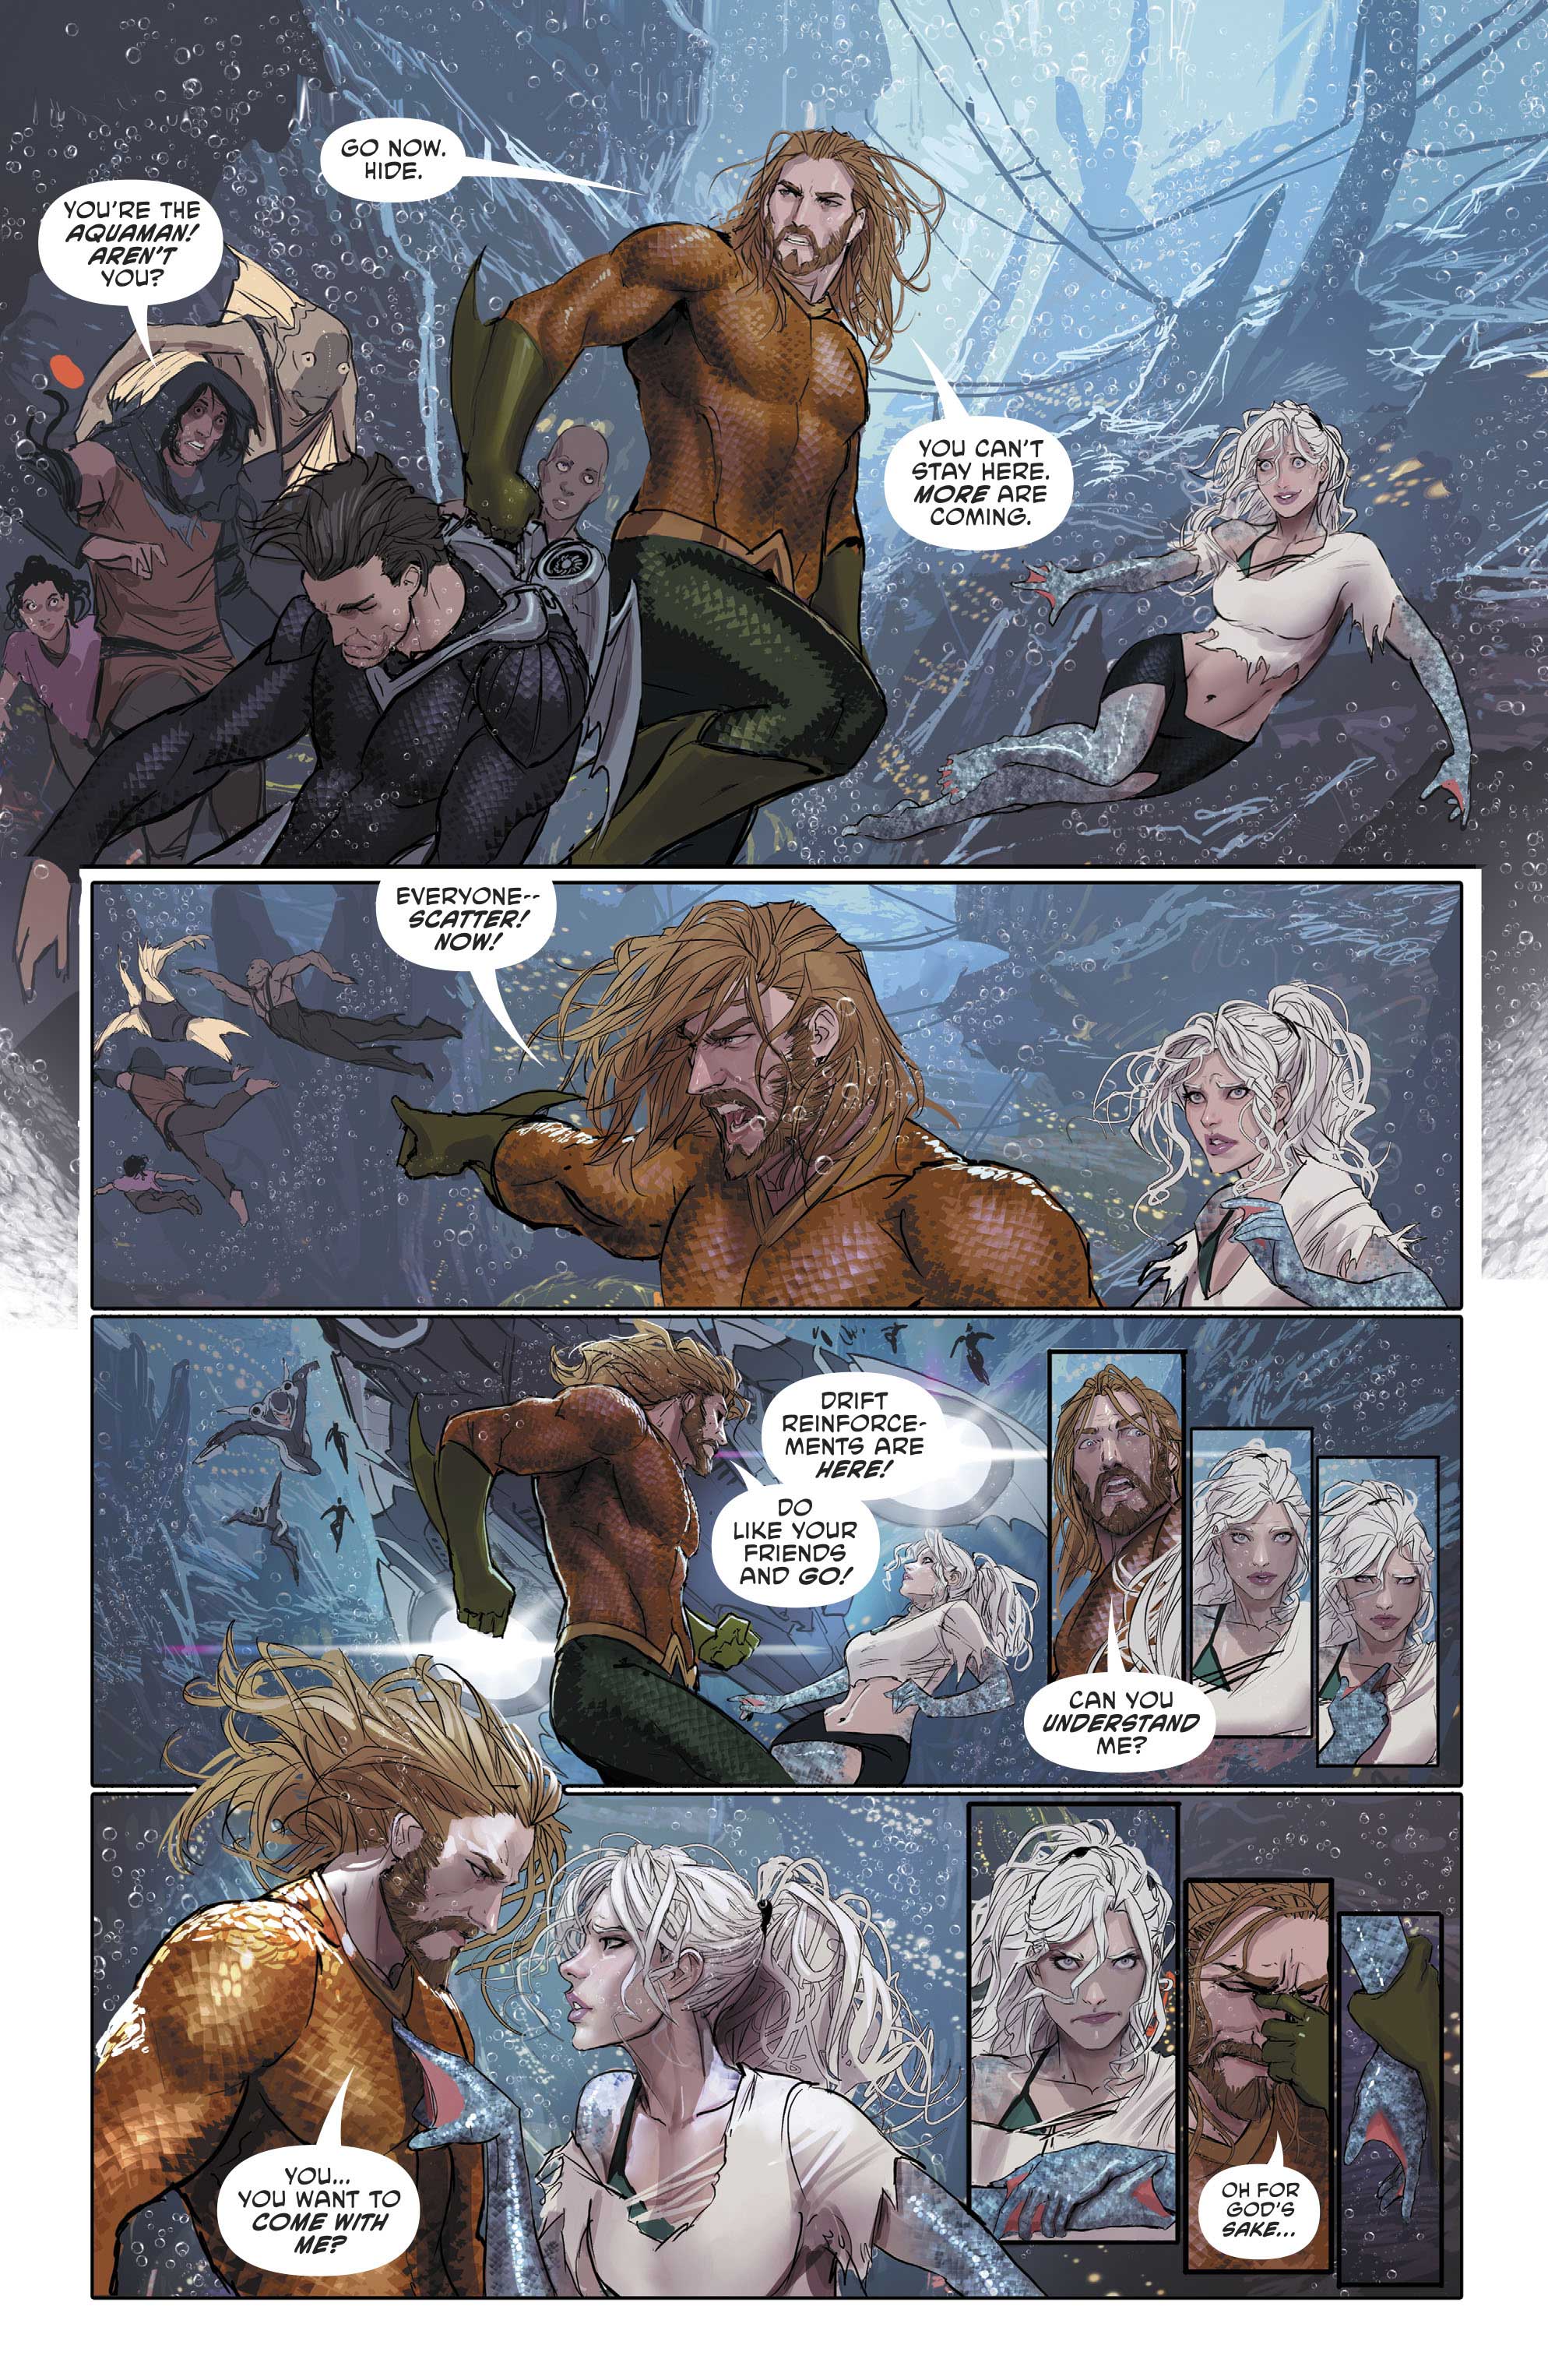 Aquaman featuring Dolphin by Stjepan Sejic